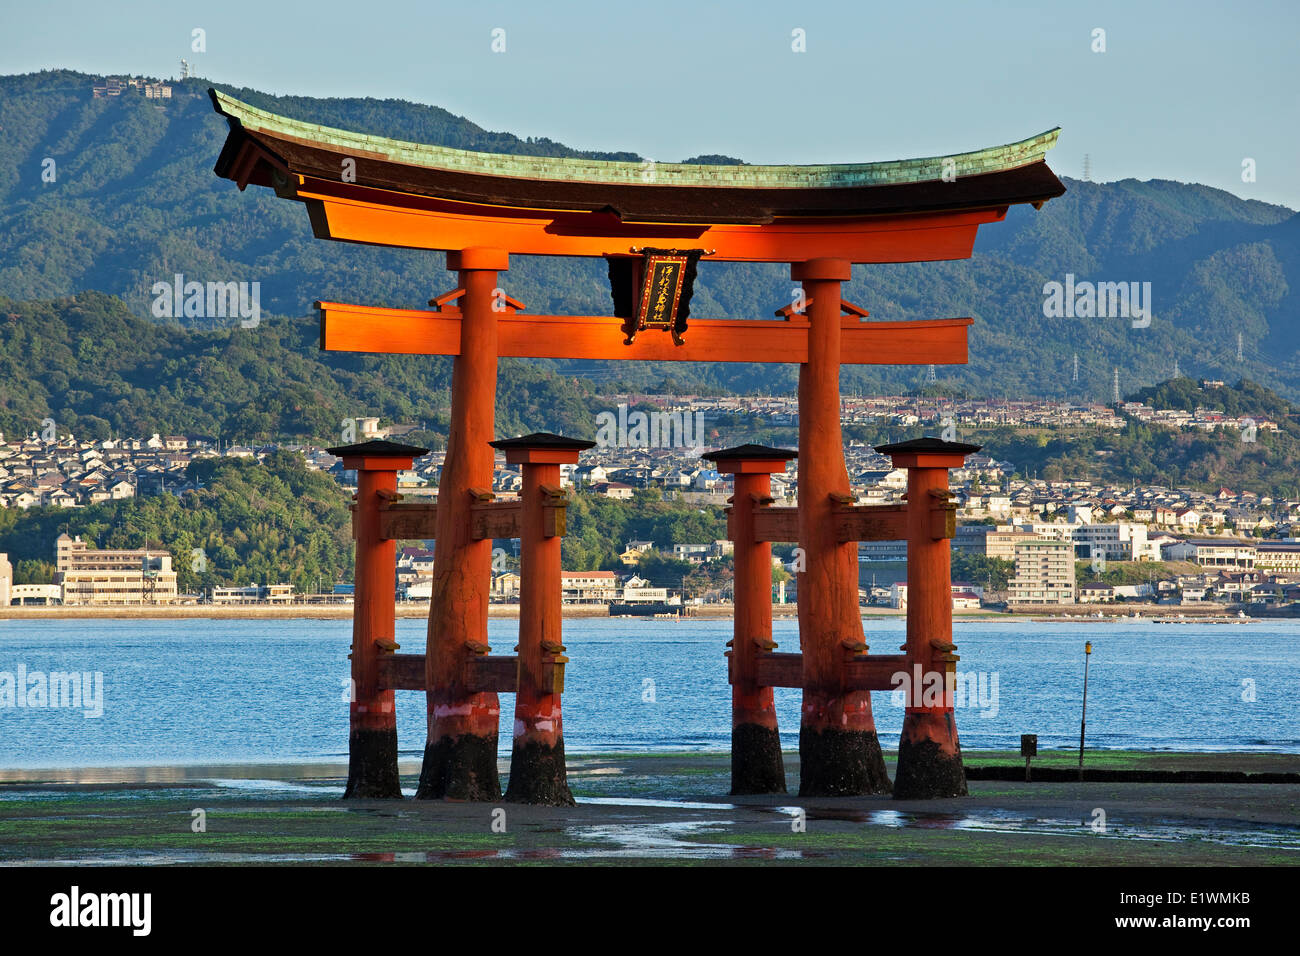 Giant torii gate that is part of the Itsukushima Shrine complex on the island of Miyajima, Japan. Stock Photo